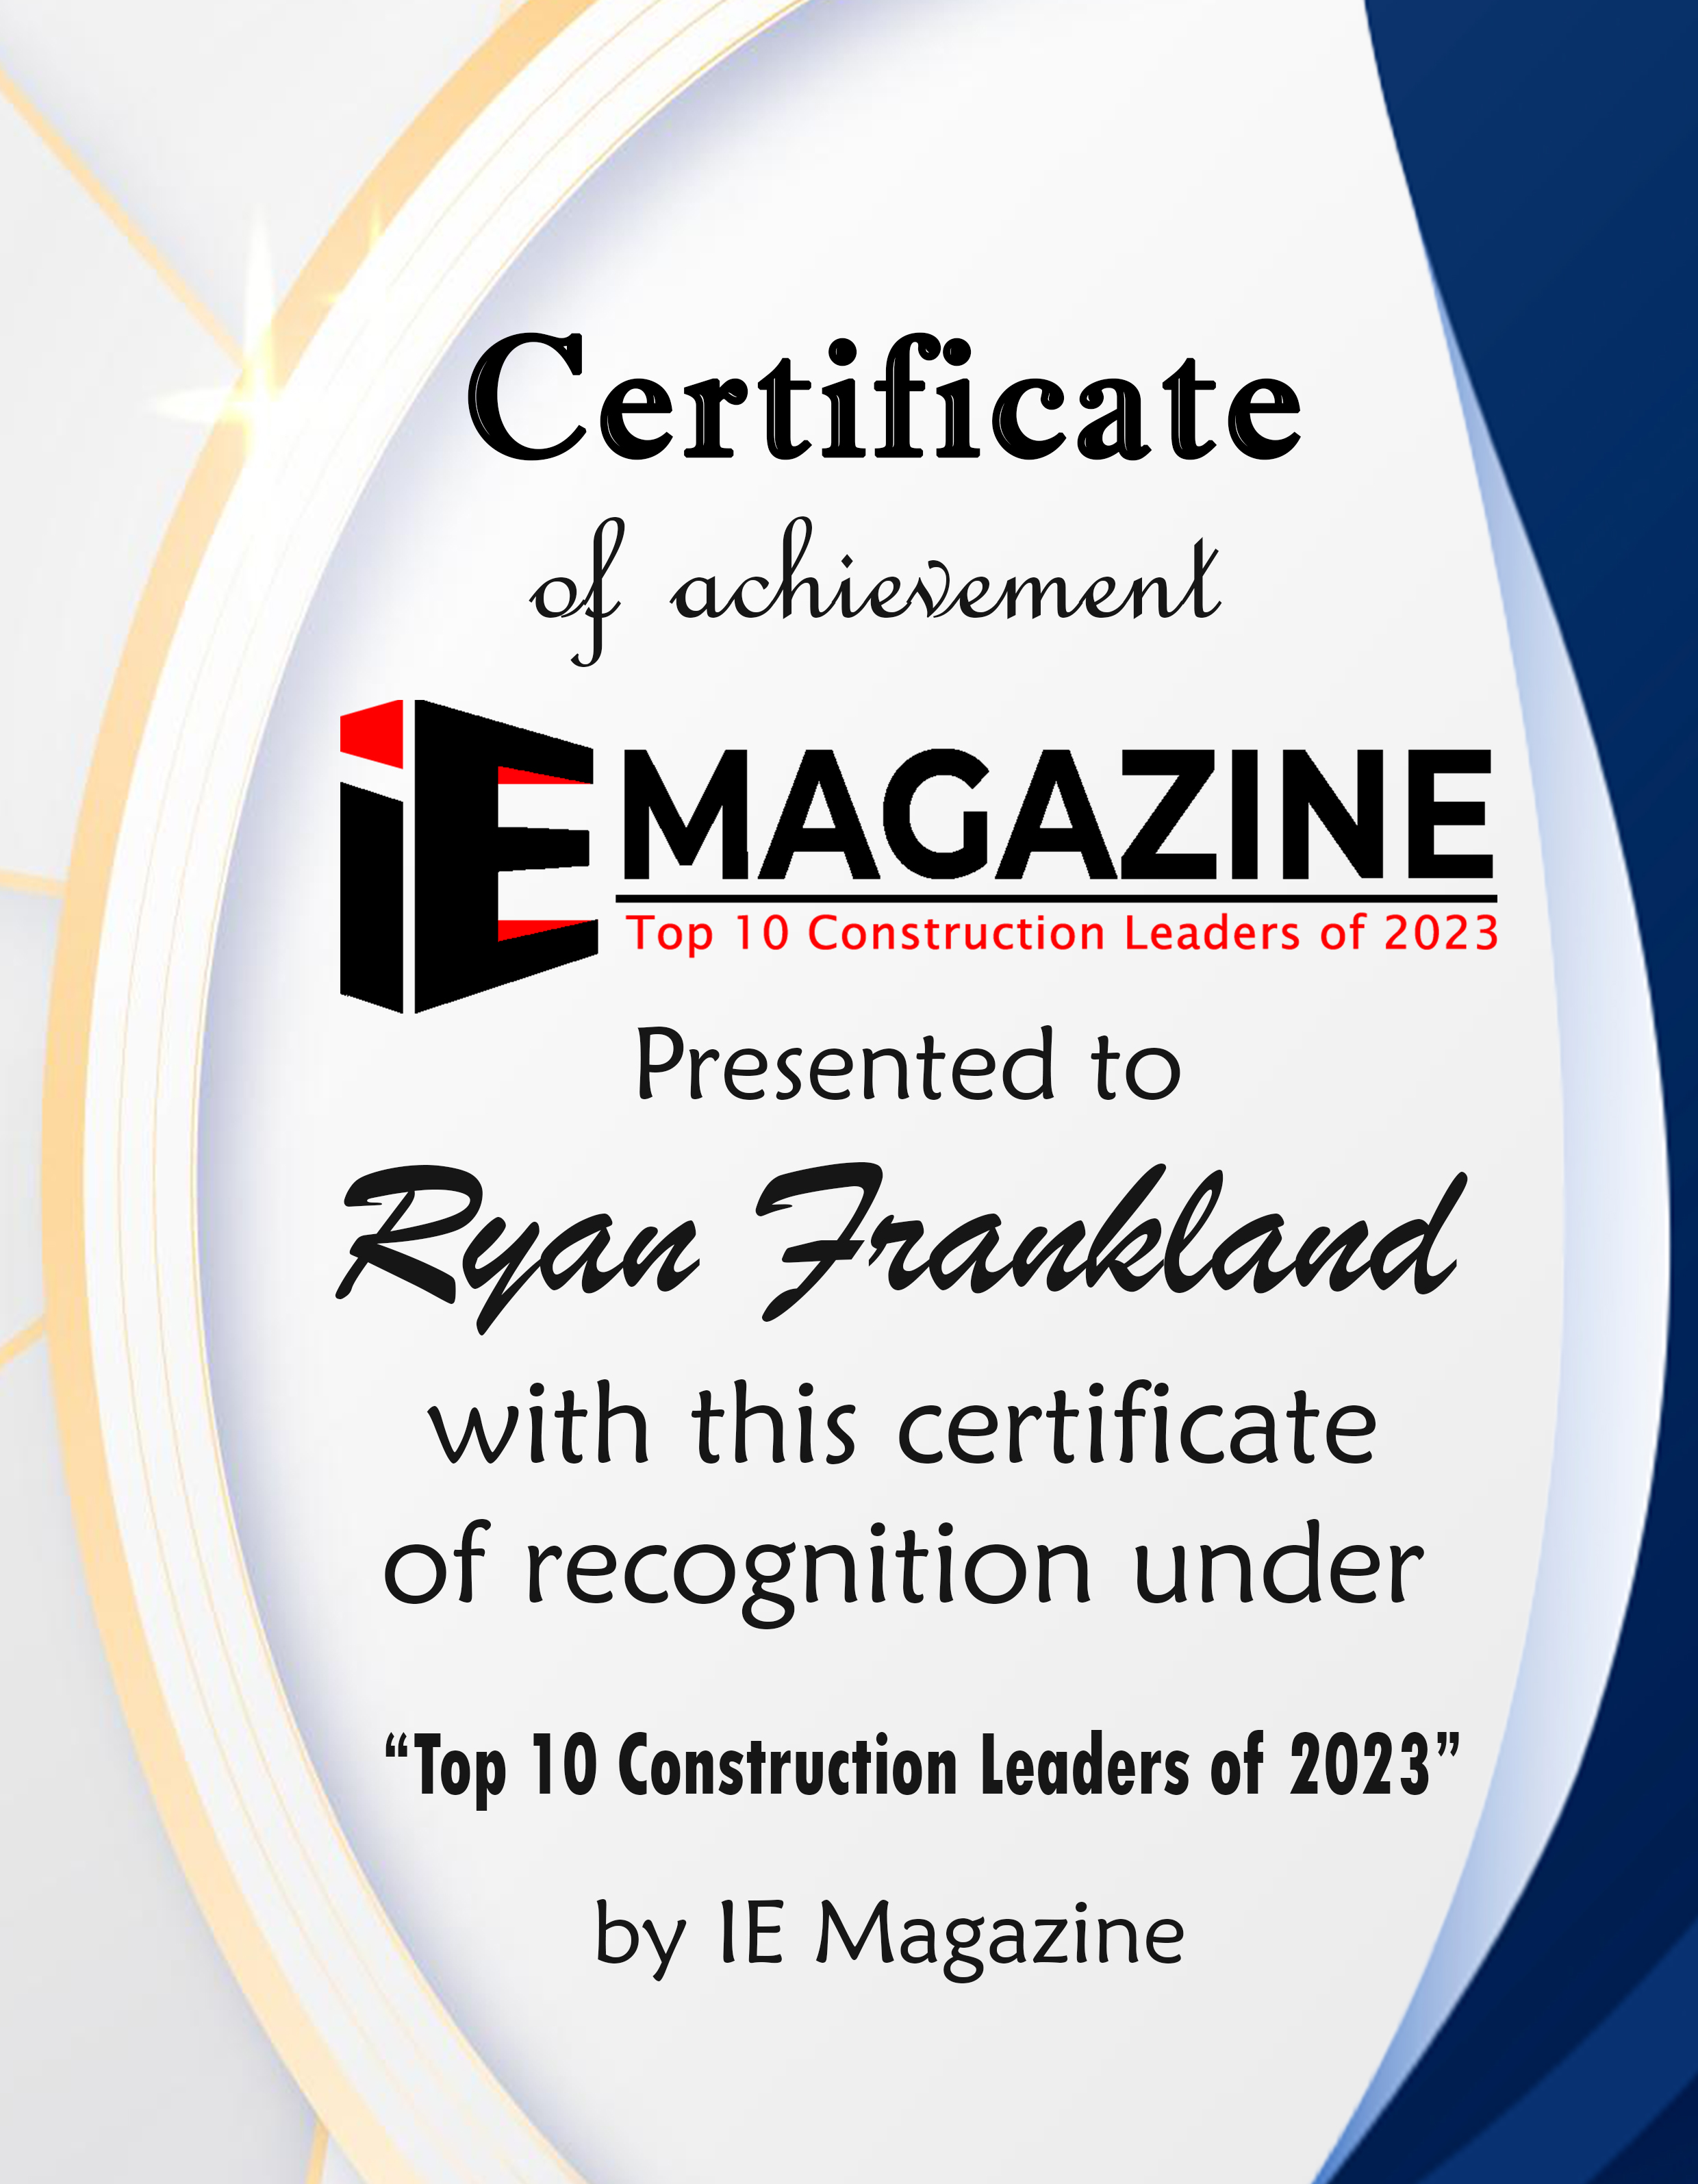 Ryan Frankland, President & CEO for ProPart Modular Certificate